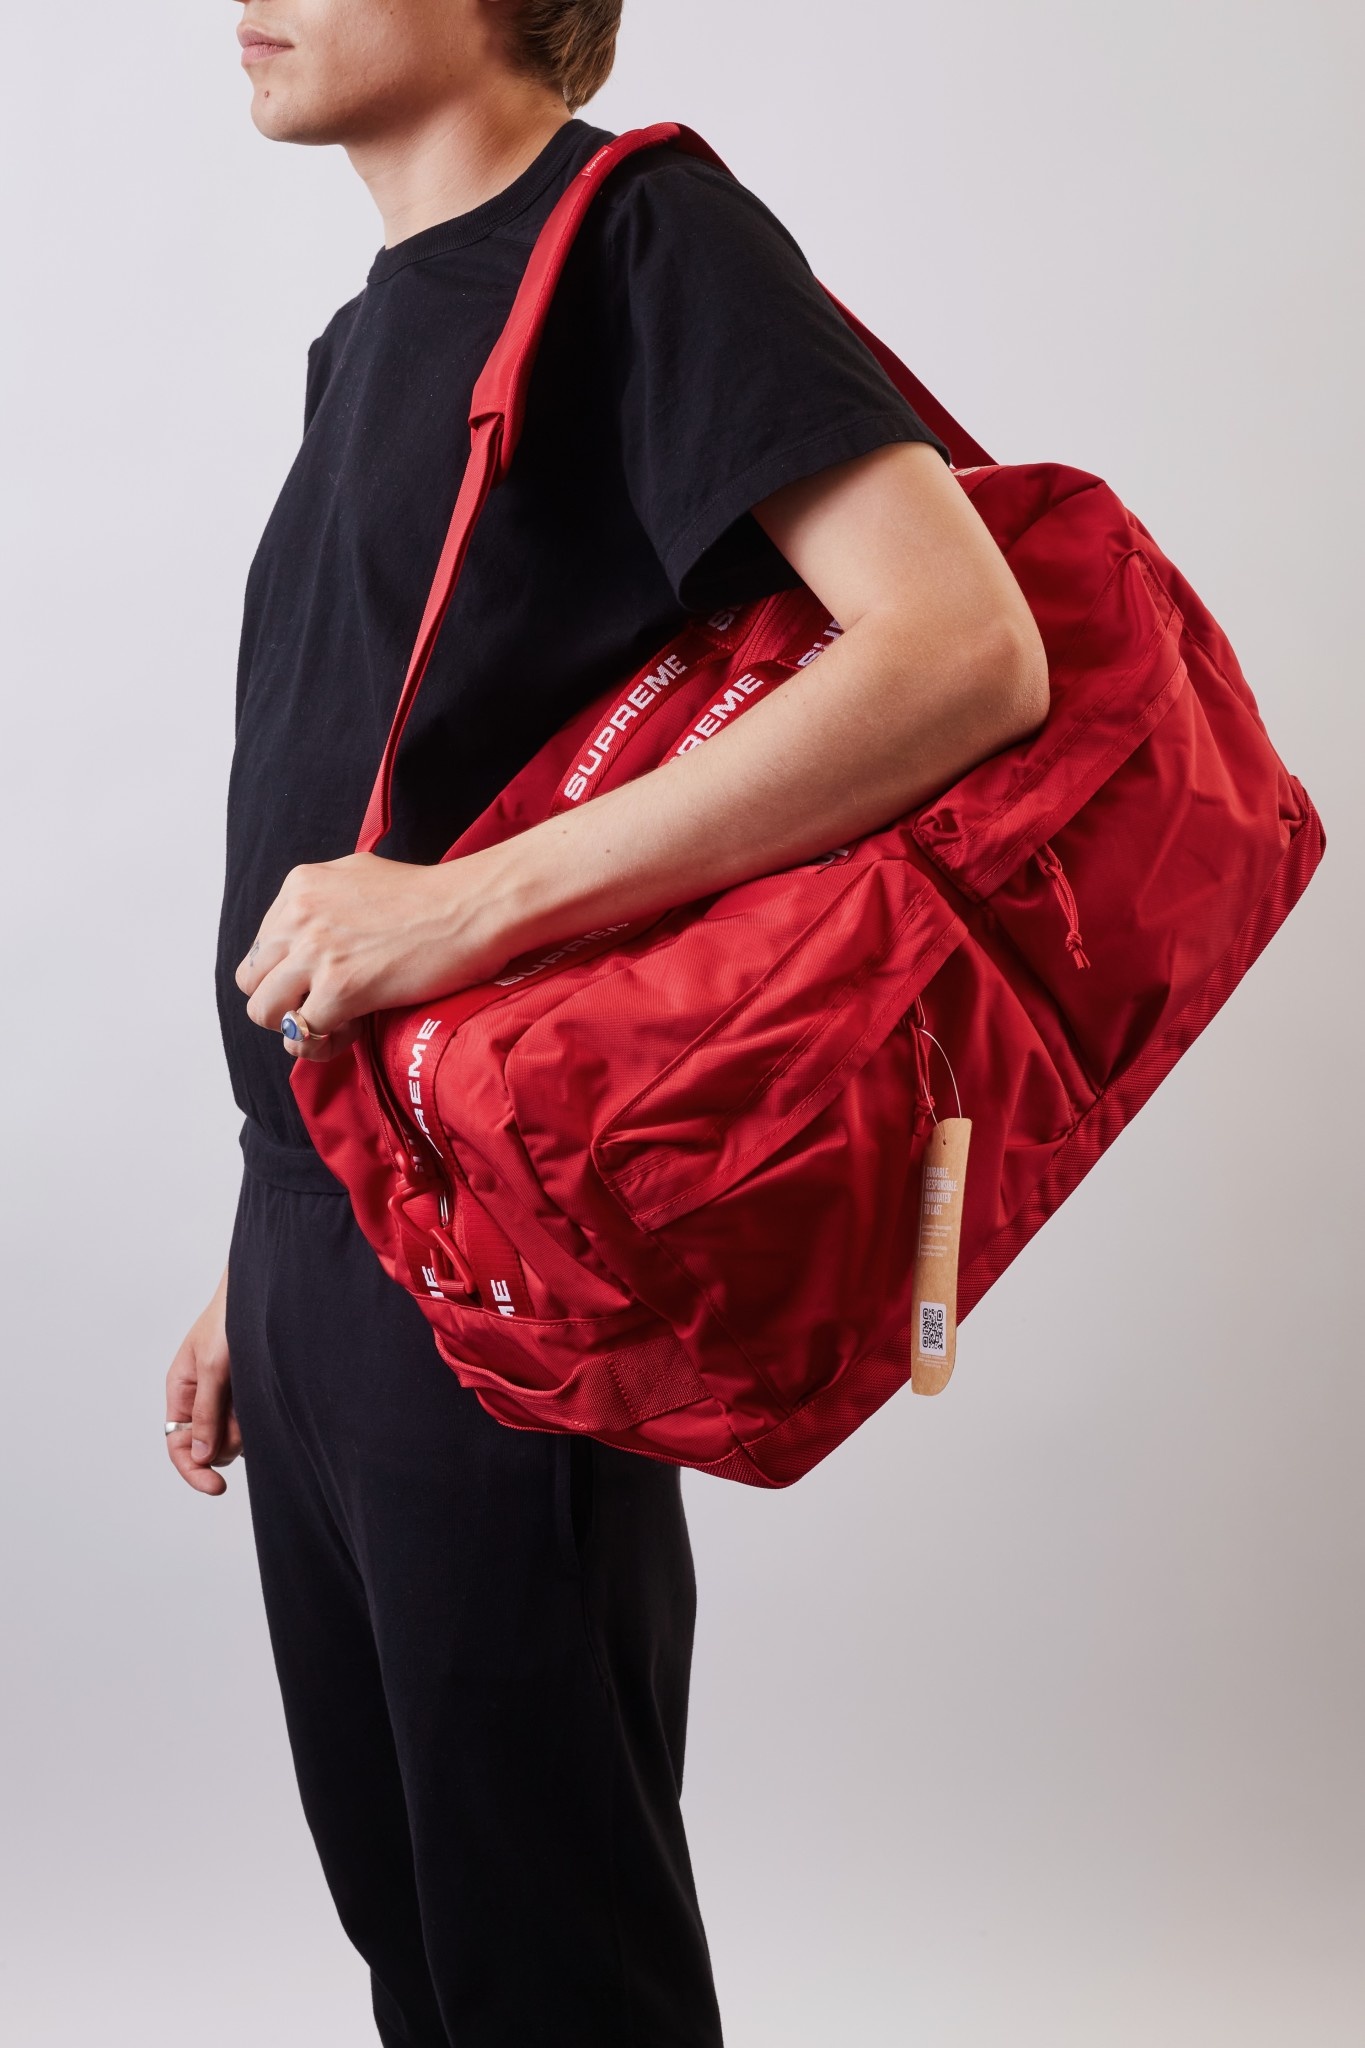 Red Polyester Supreme Duffle Bag, For Travel